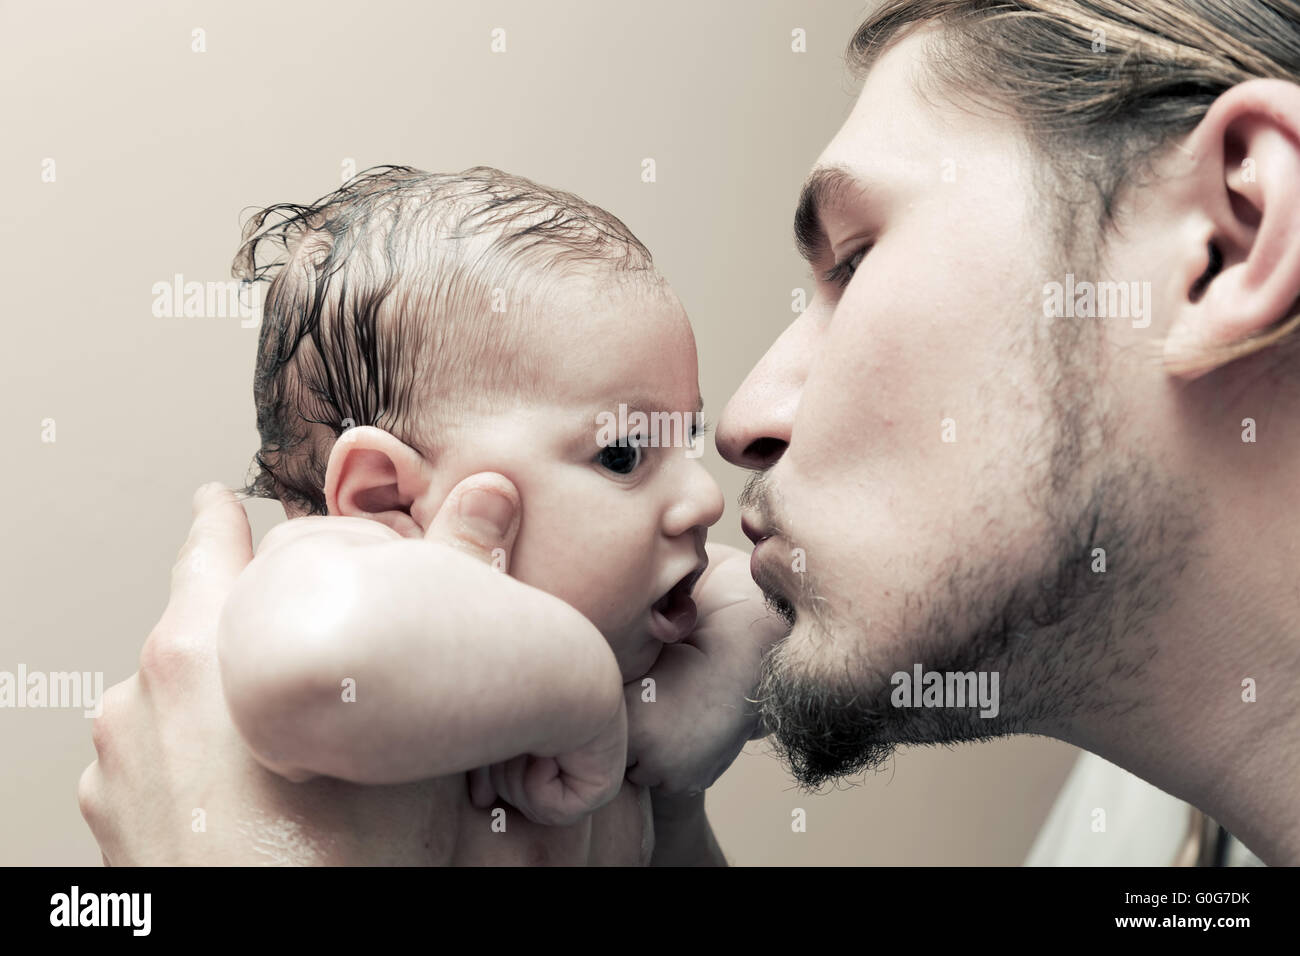 Father with his young baby cuddling and kissing him on cheek. Parenthood Stock Photo